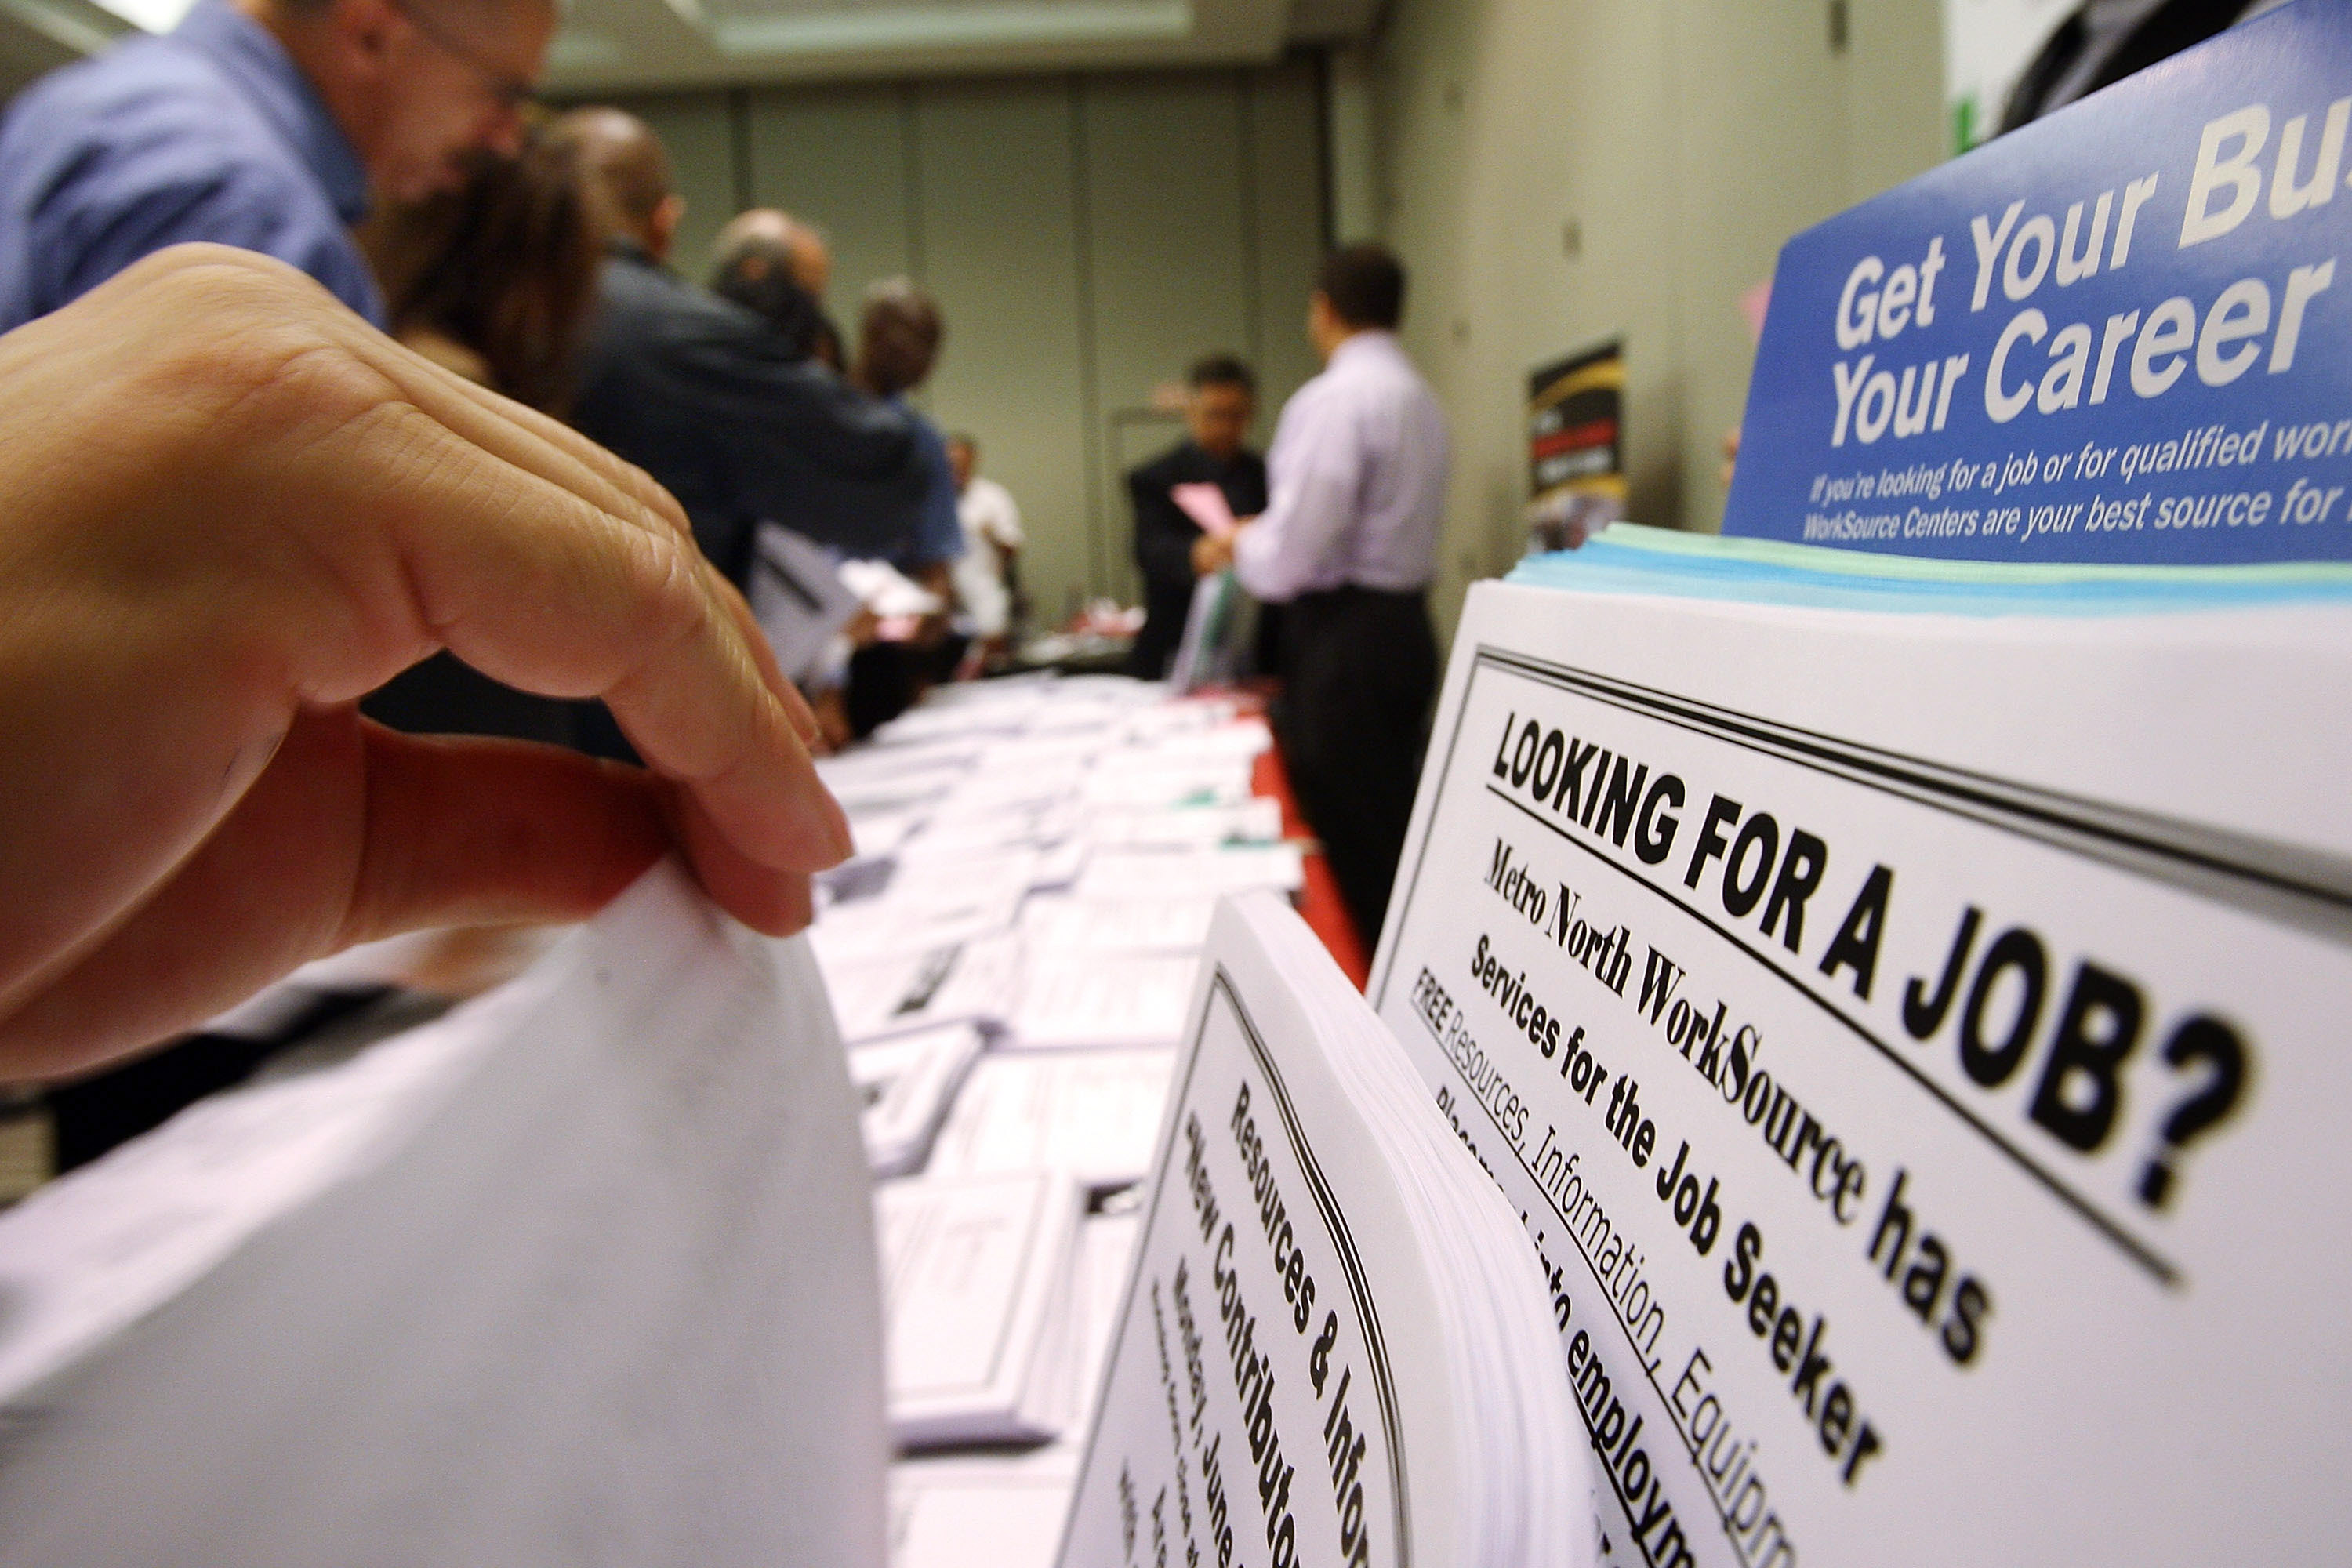 Job seekers attend a career expo